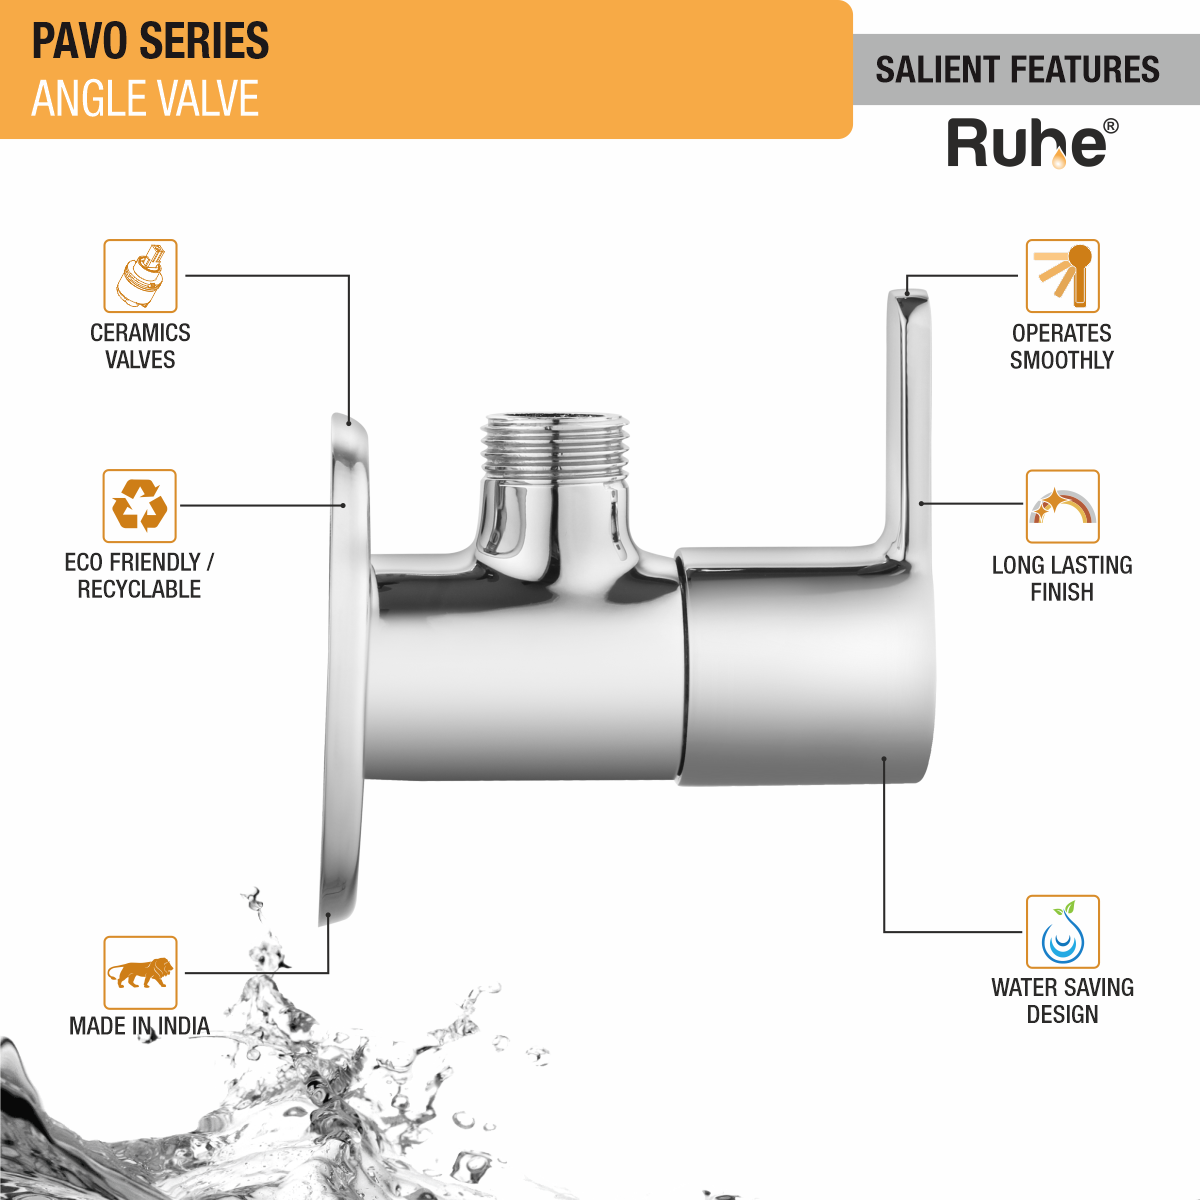 Pavo Angle Valve Brass Faucet features